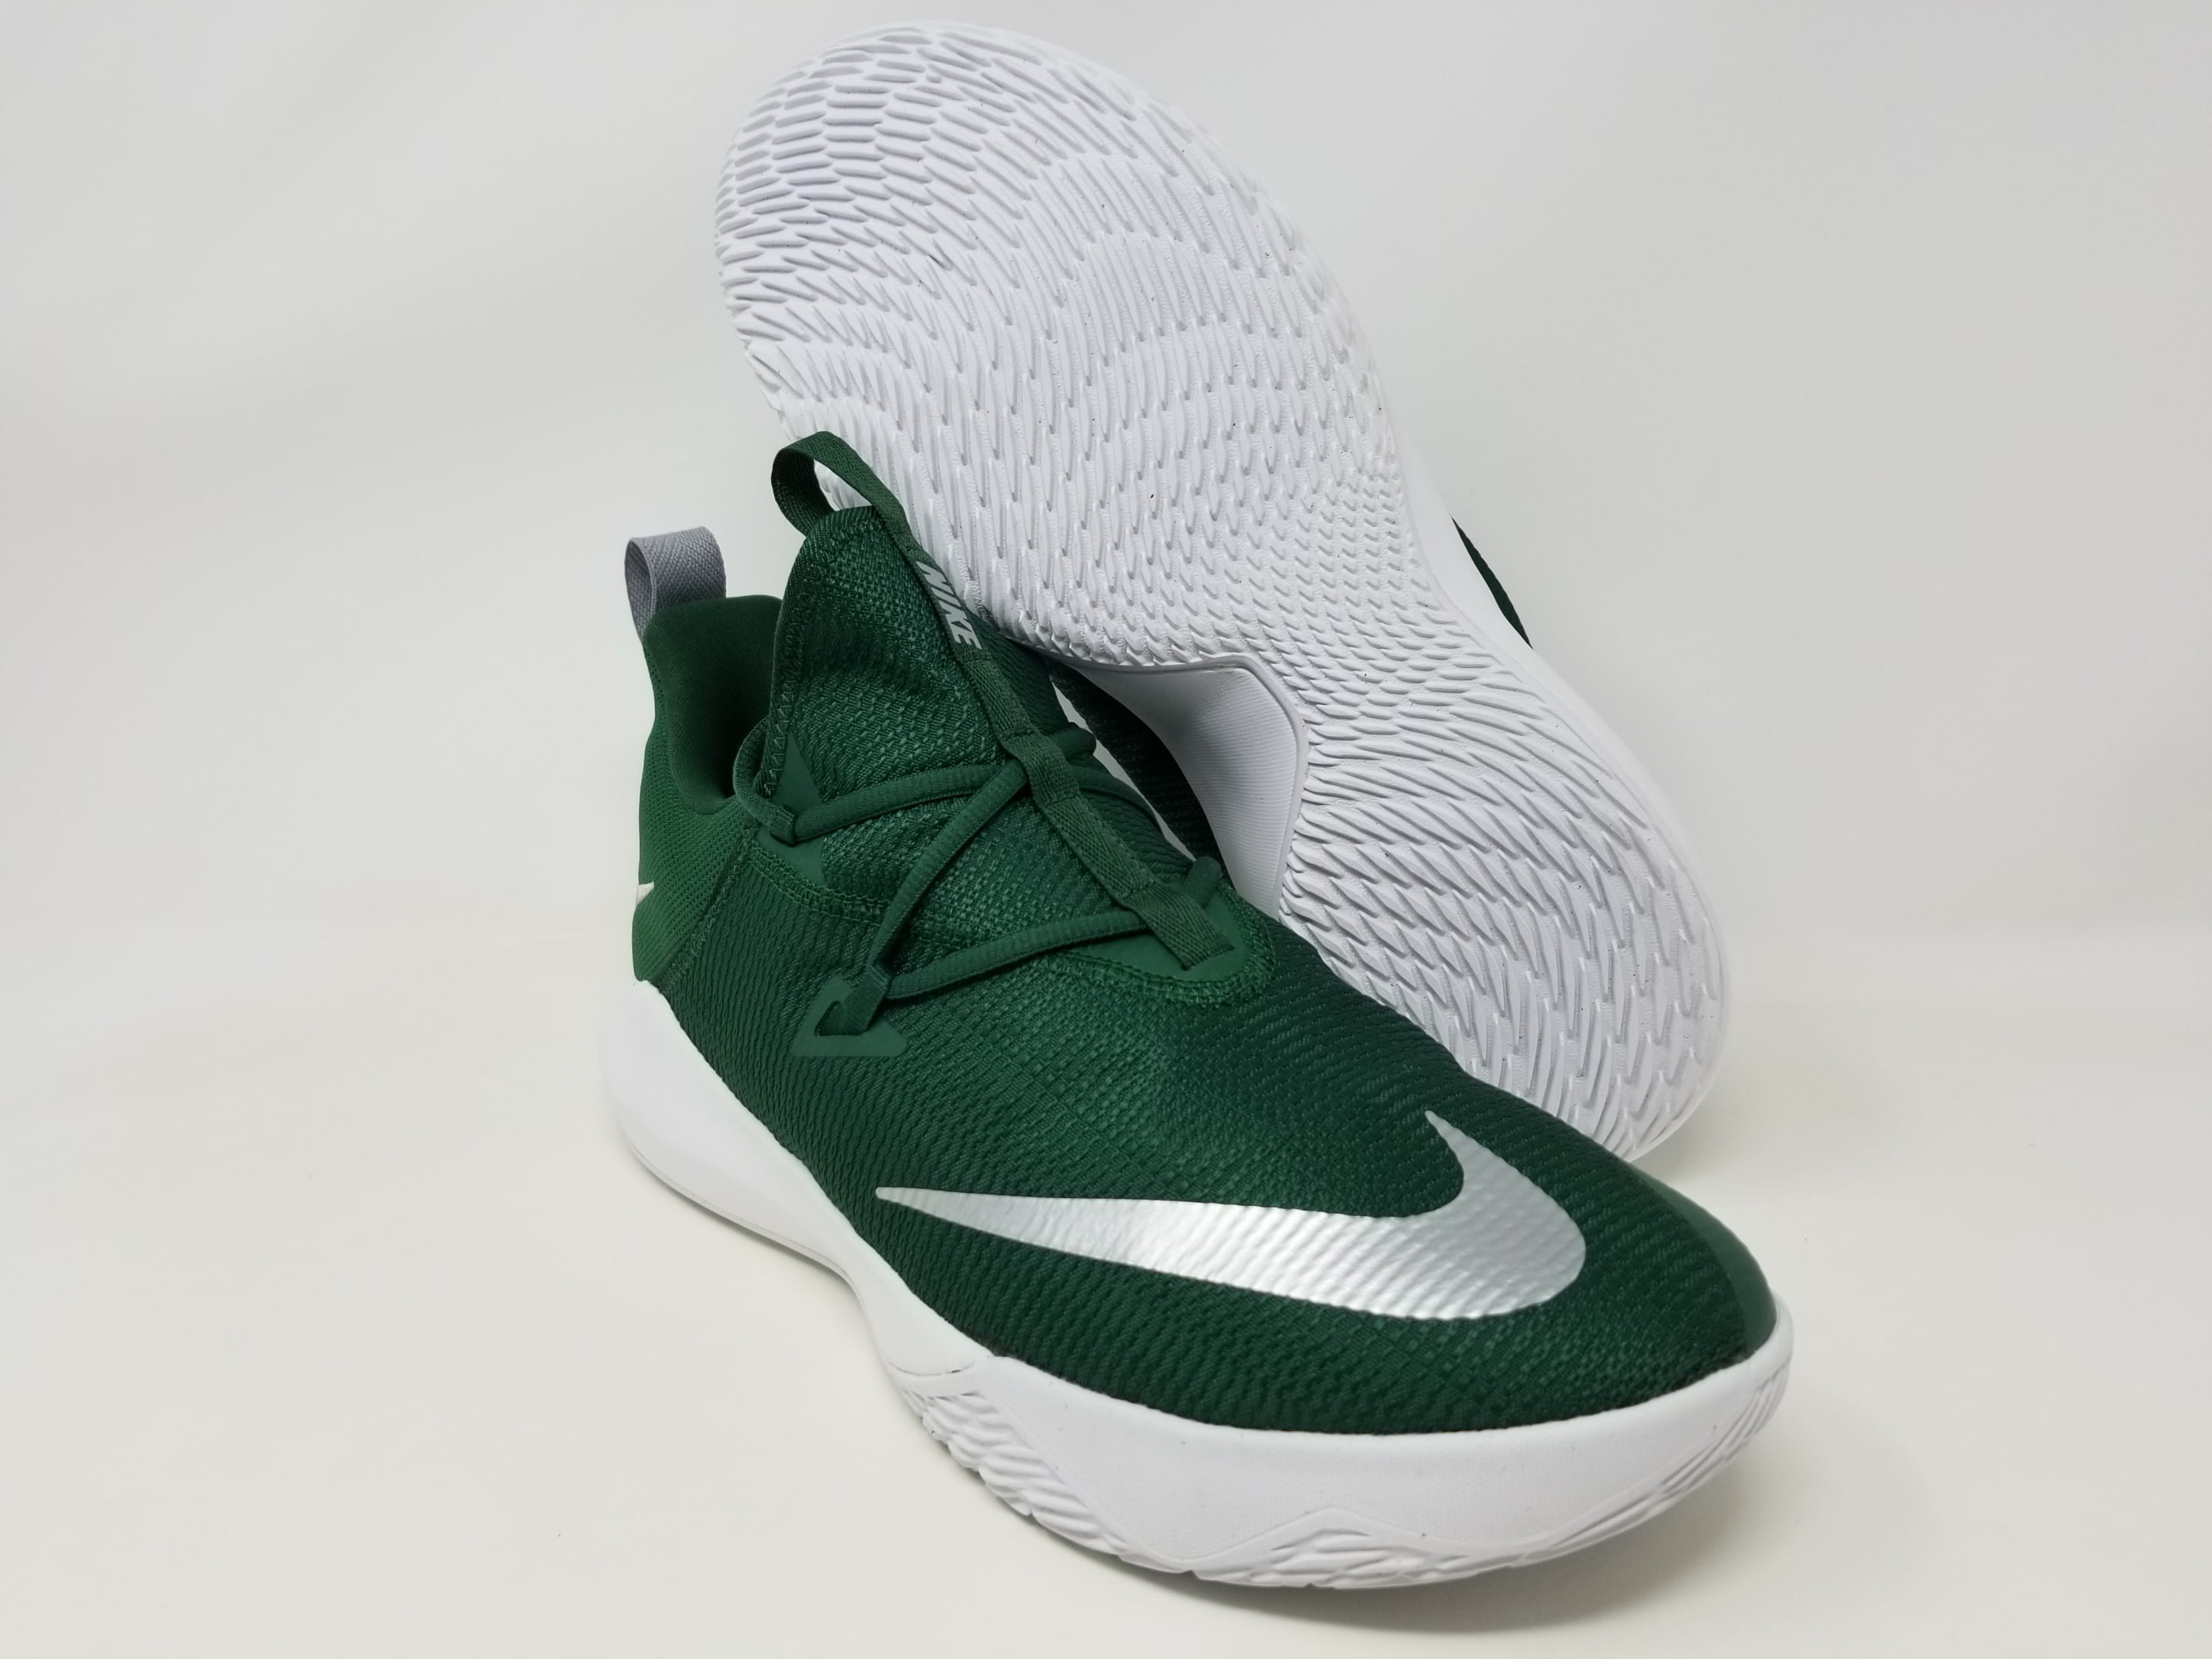 Nike Men's Zoom Shift 2 TB Basketball Shoes, Green/Silver, 15 D(M) US دخان تركي